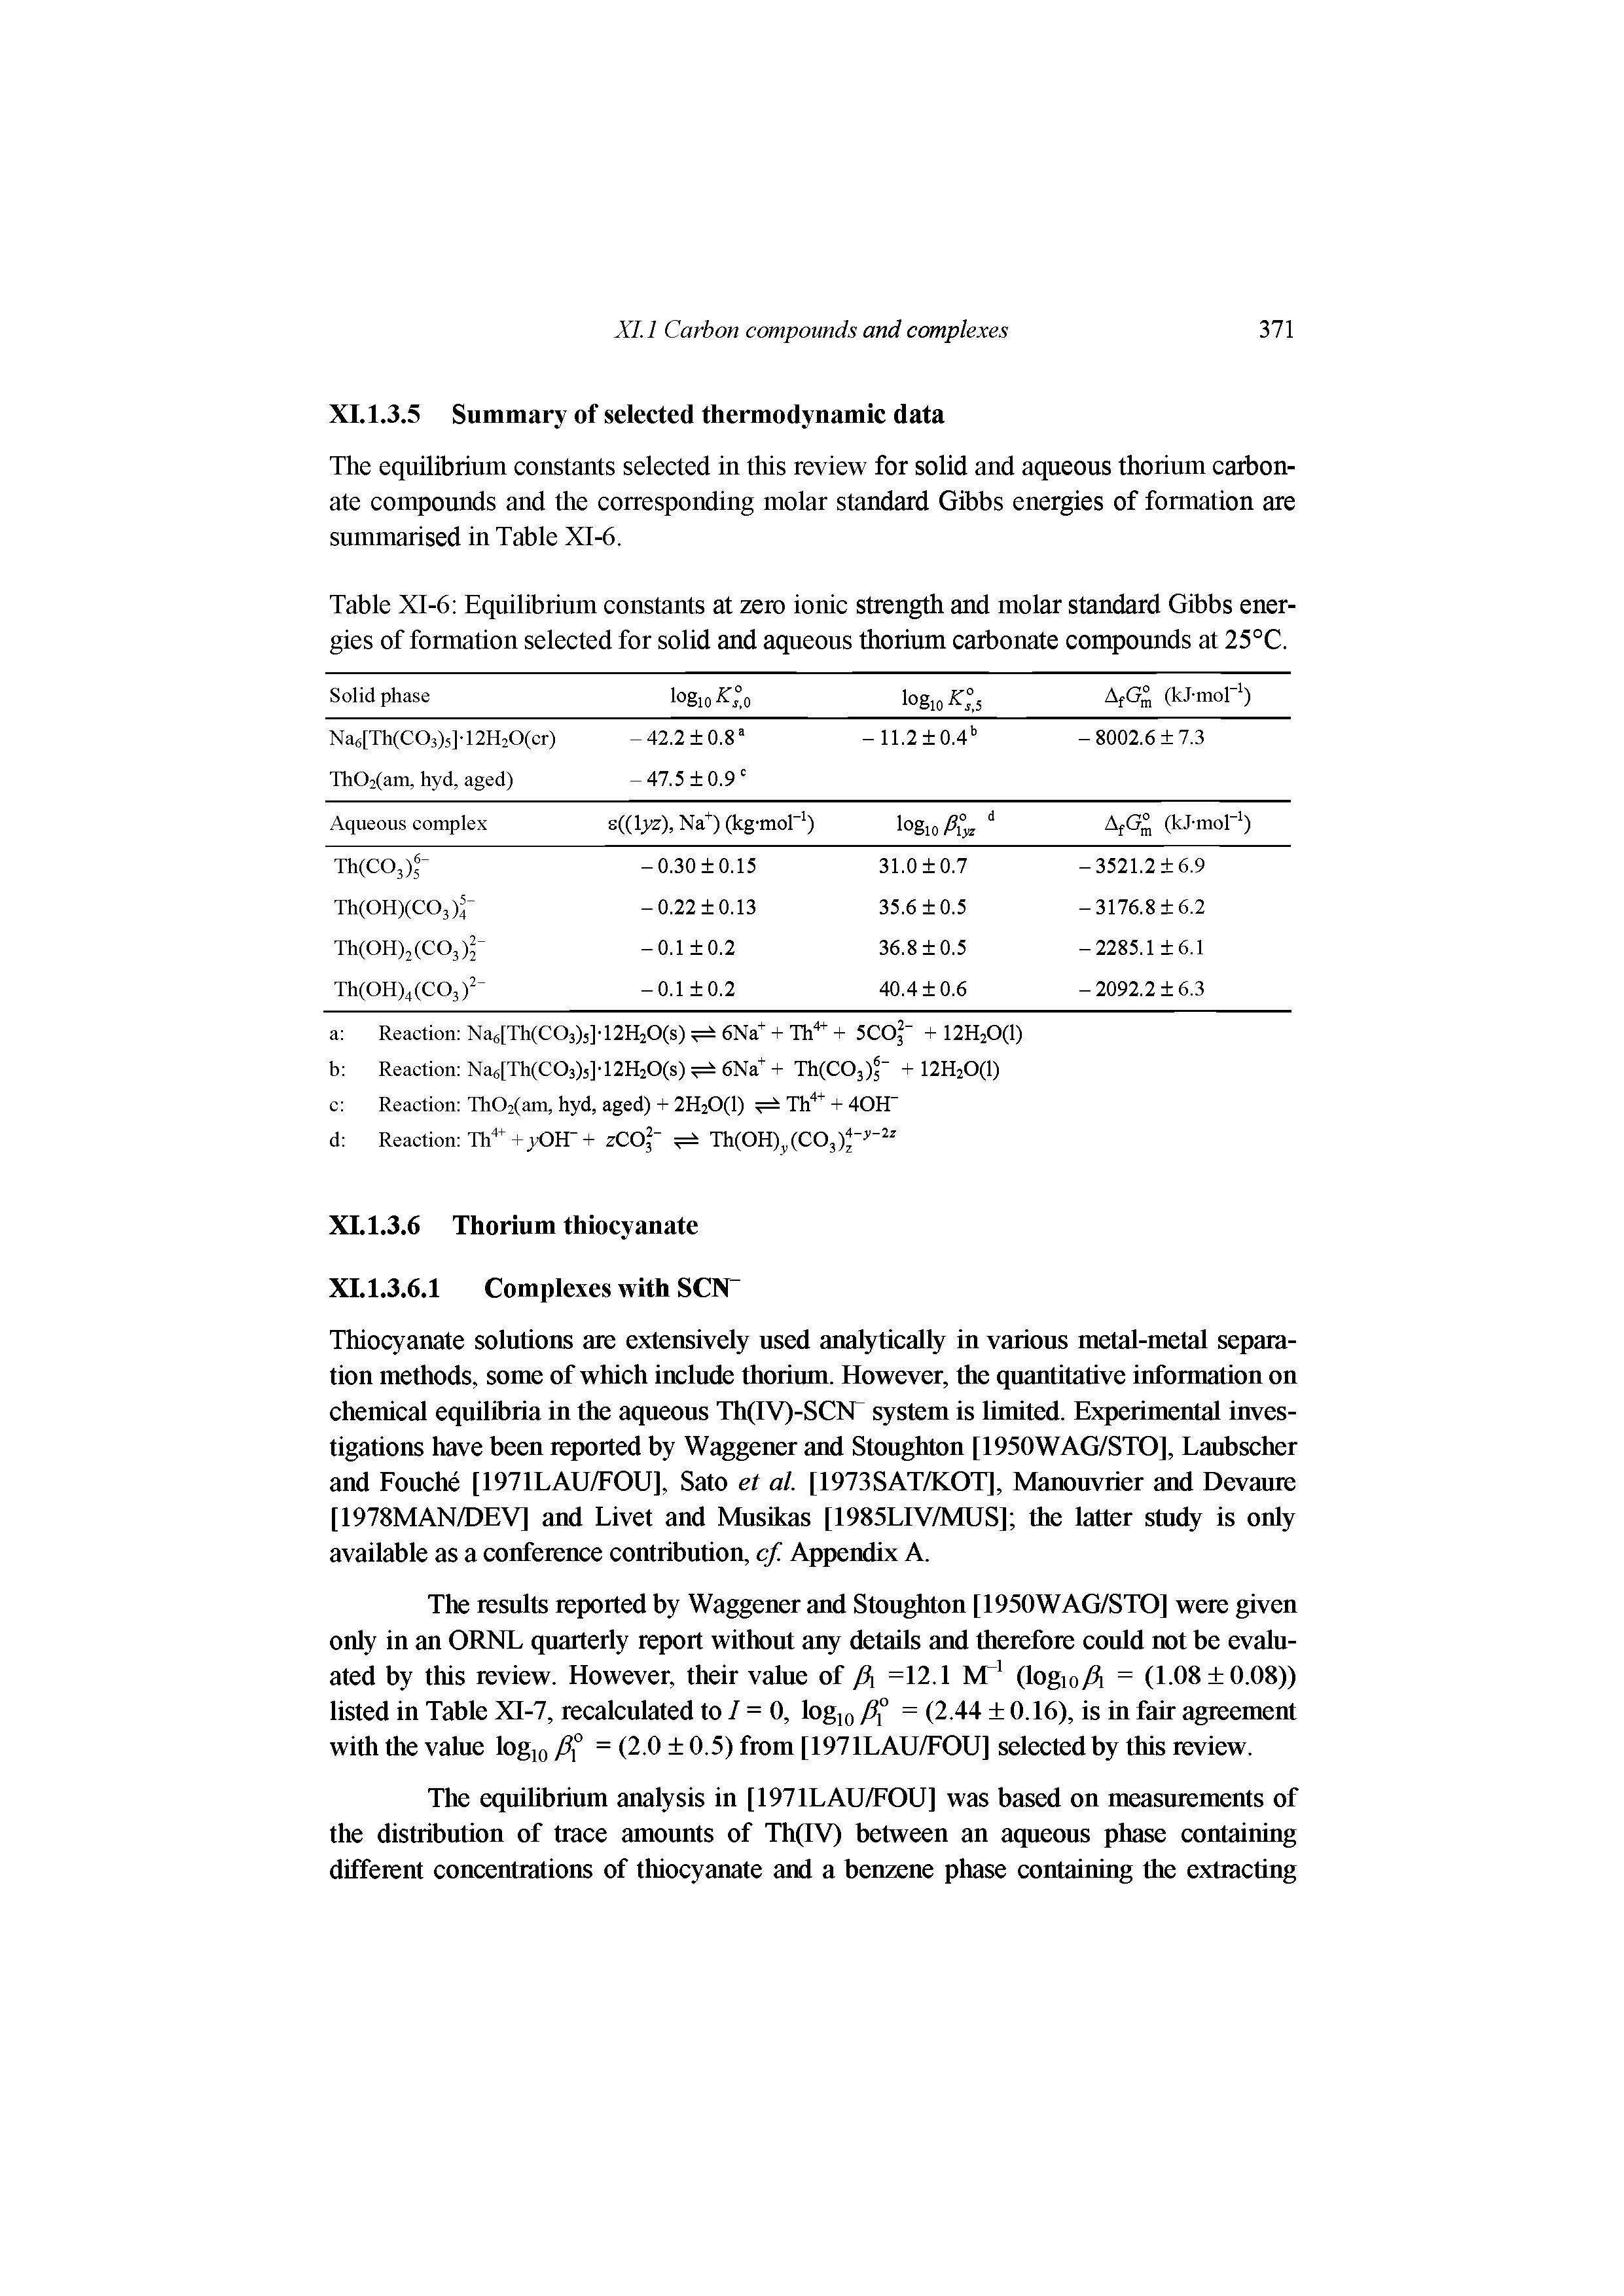 Table XI-6 Equilibrium constants at zero ionic strength and molar standard Gibbs energies of formation selected for solid and aqueous thorium carbonate compounds at 25°C.